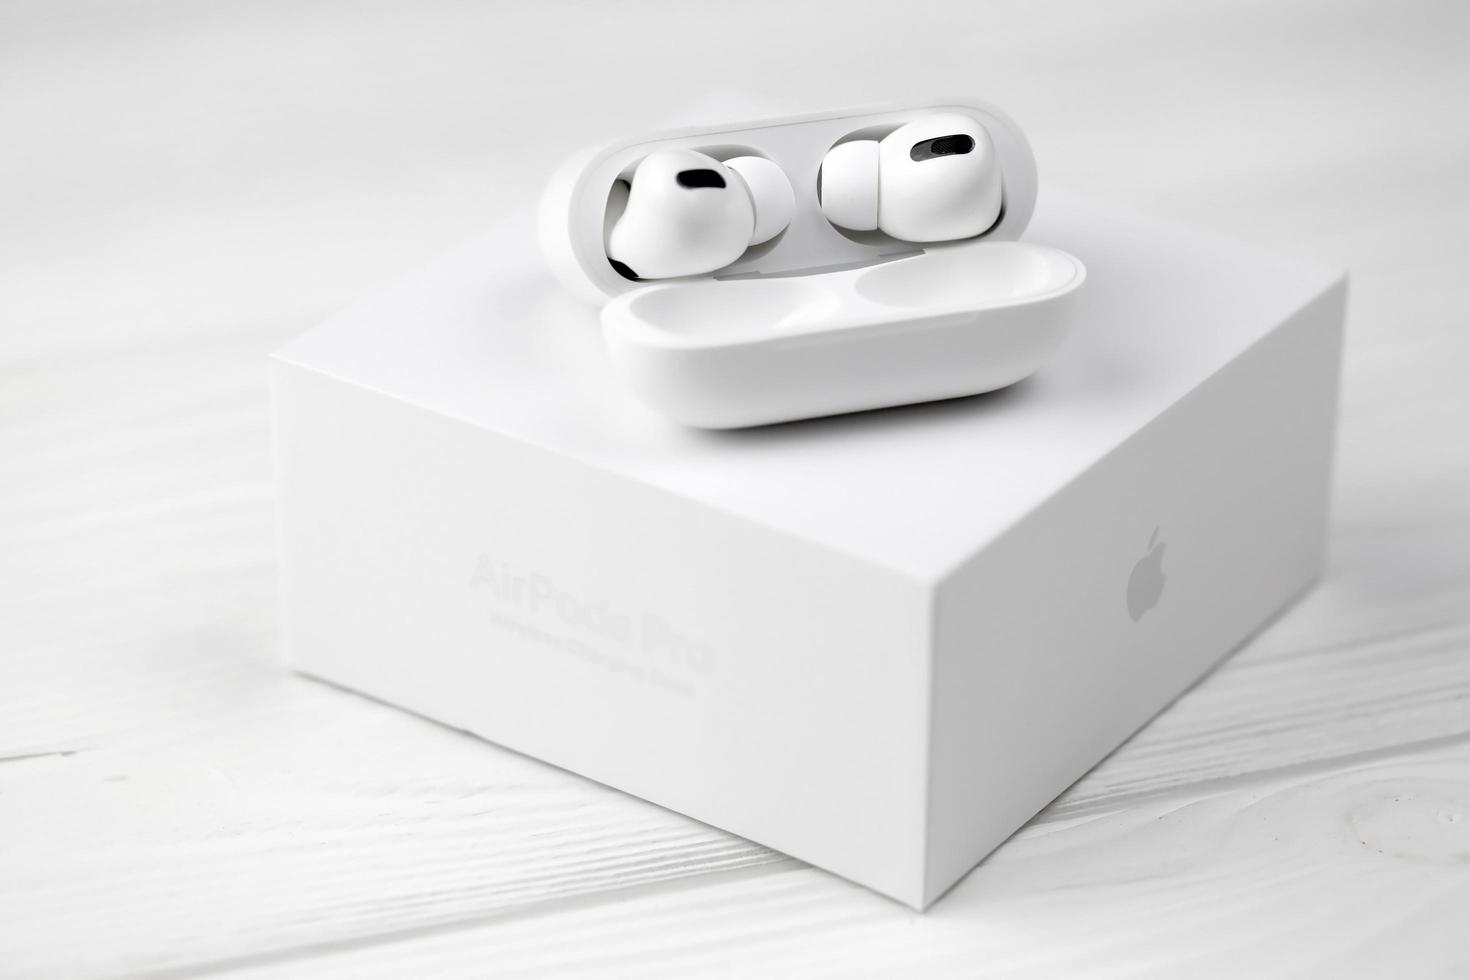 KHARKOV, UKRAINE - MAY 12, 2022 Apple AirPods Pro on a white background. Wireless headphones with charging case and a box. Apple Inc. is an American technology company photo